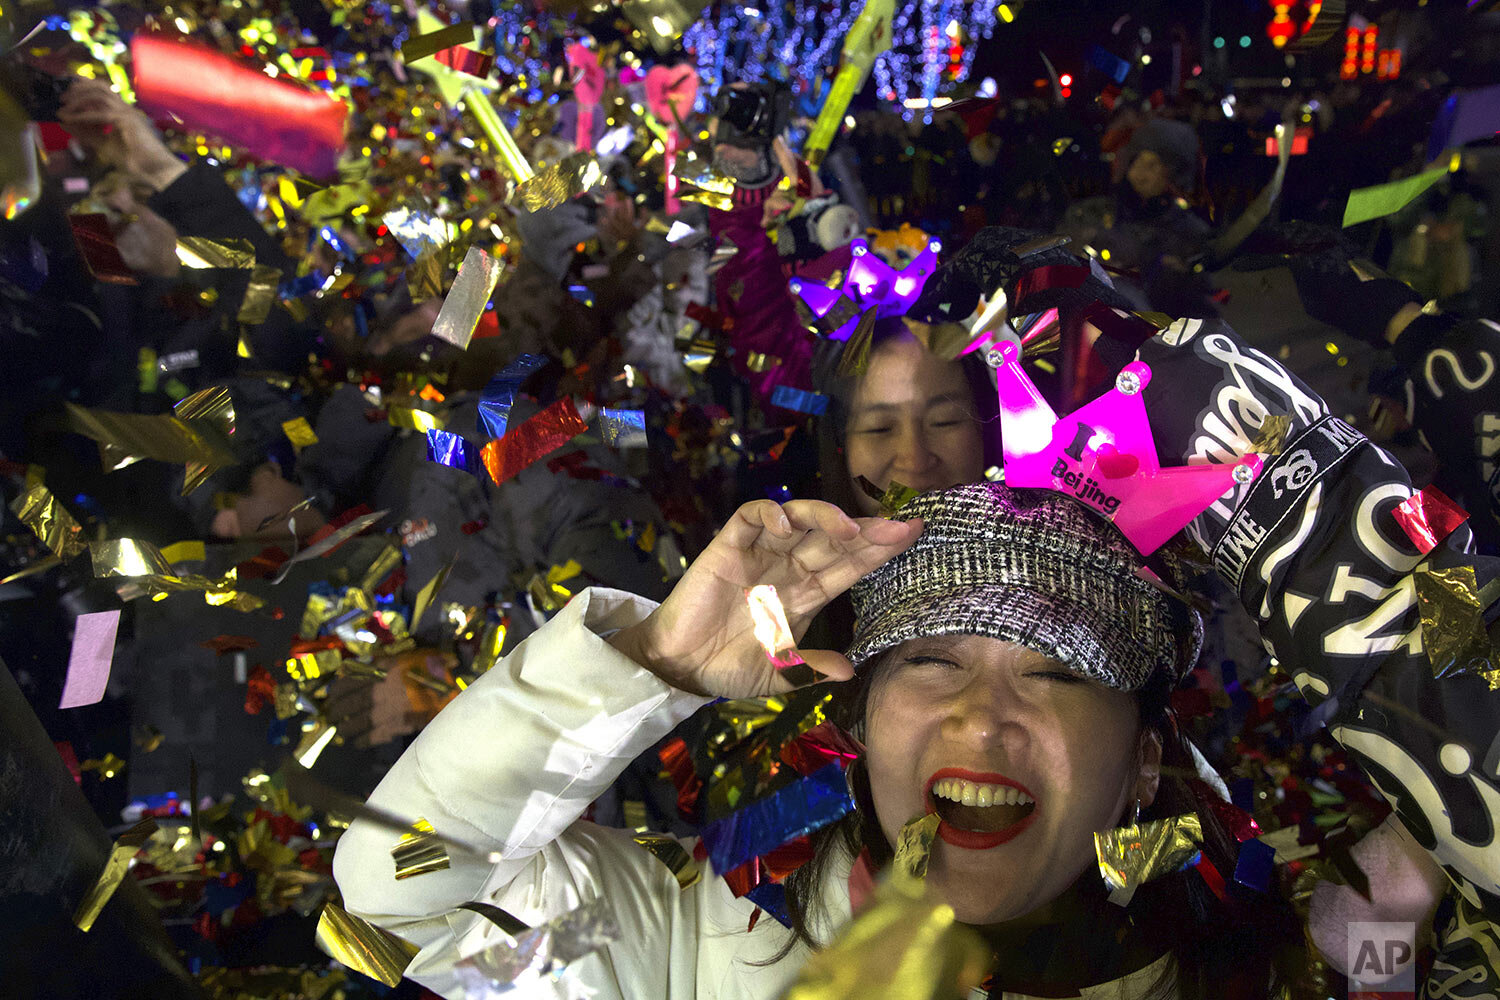  People celebrate the arrival of the year 2020 at a New Year's Eve countdown event near the 2022 Beijing Winter Olympic headquarters in Bejing, Wednesday, Jan. 1, 2020.  (AP Photo/Ng Han Guan) 